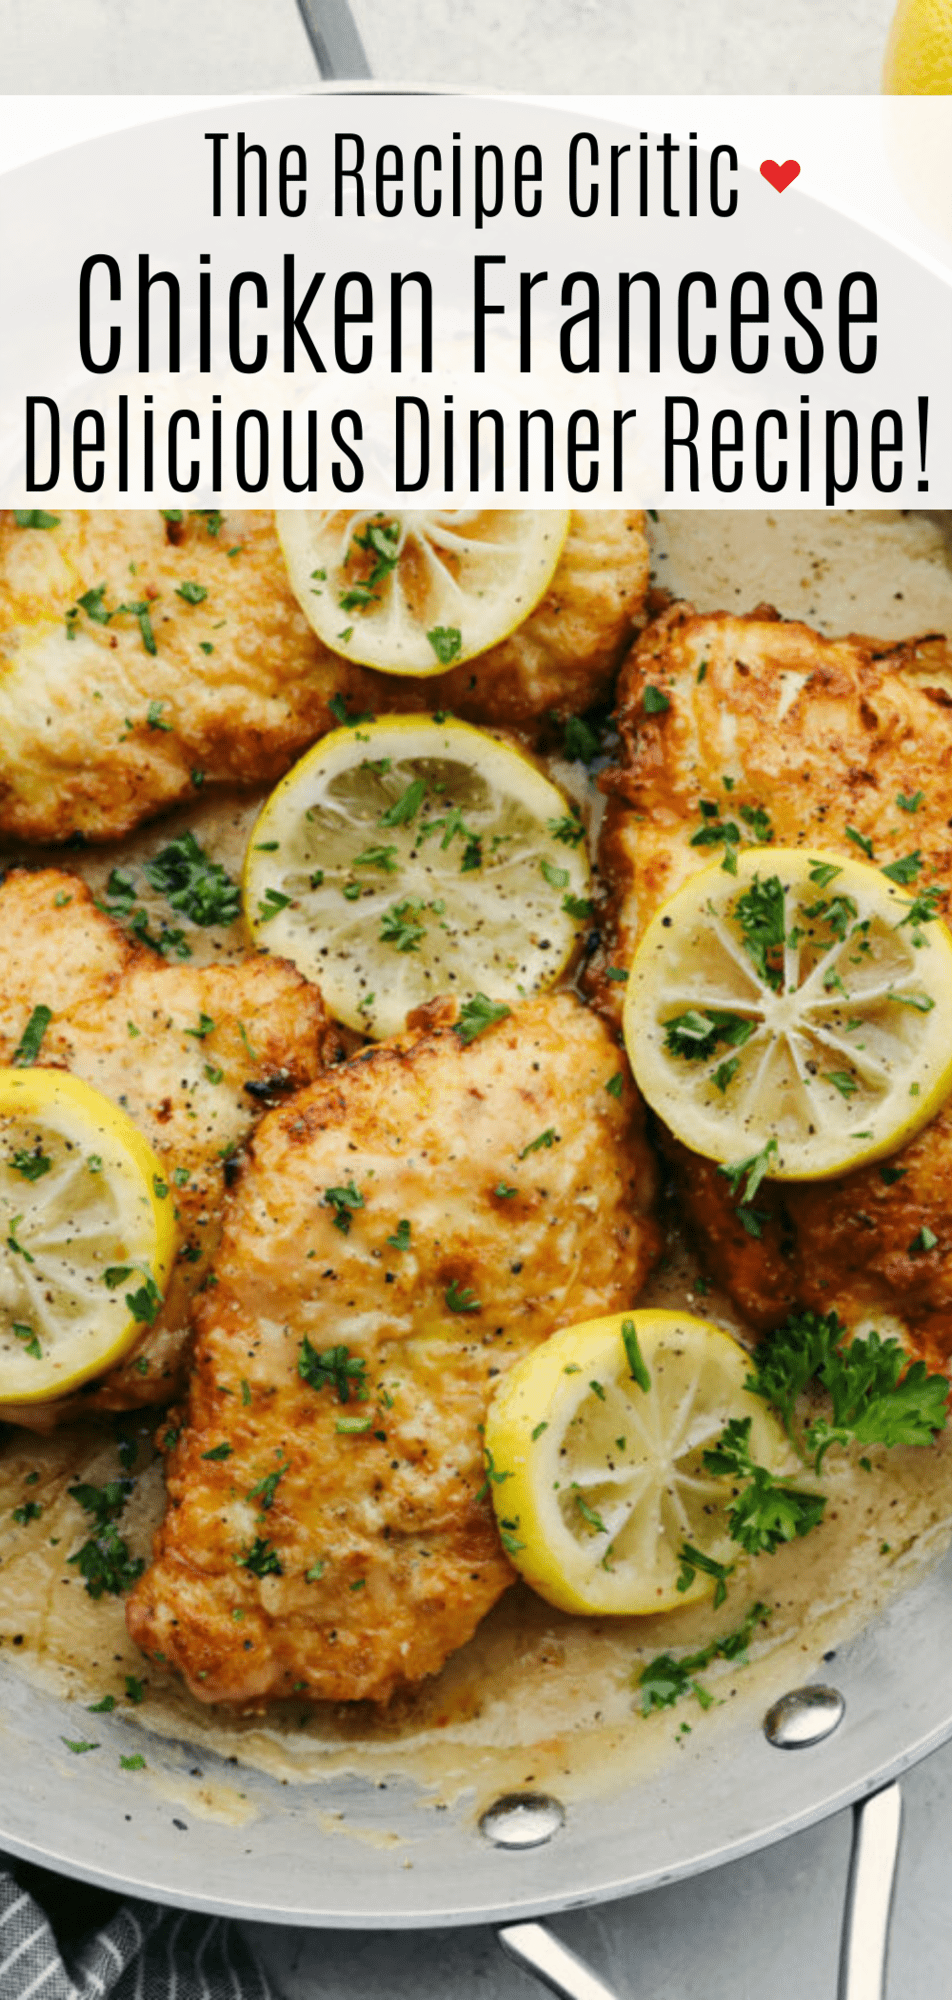 Easy to Make Chicken Francese Recipe